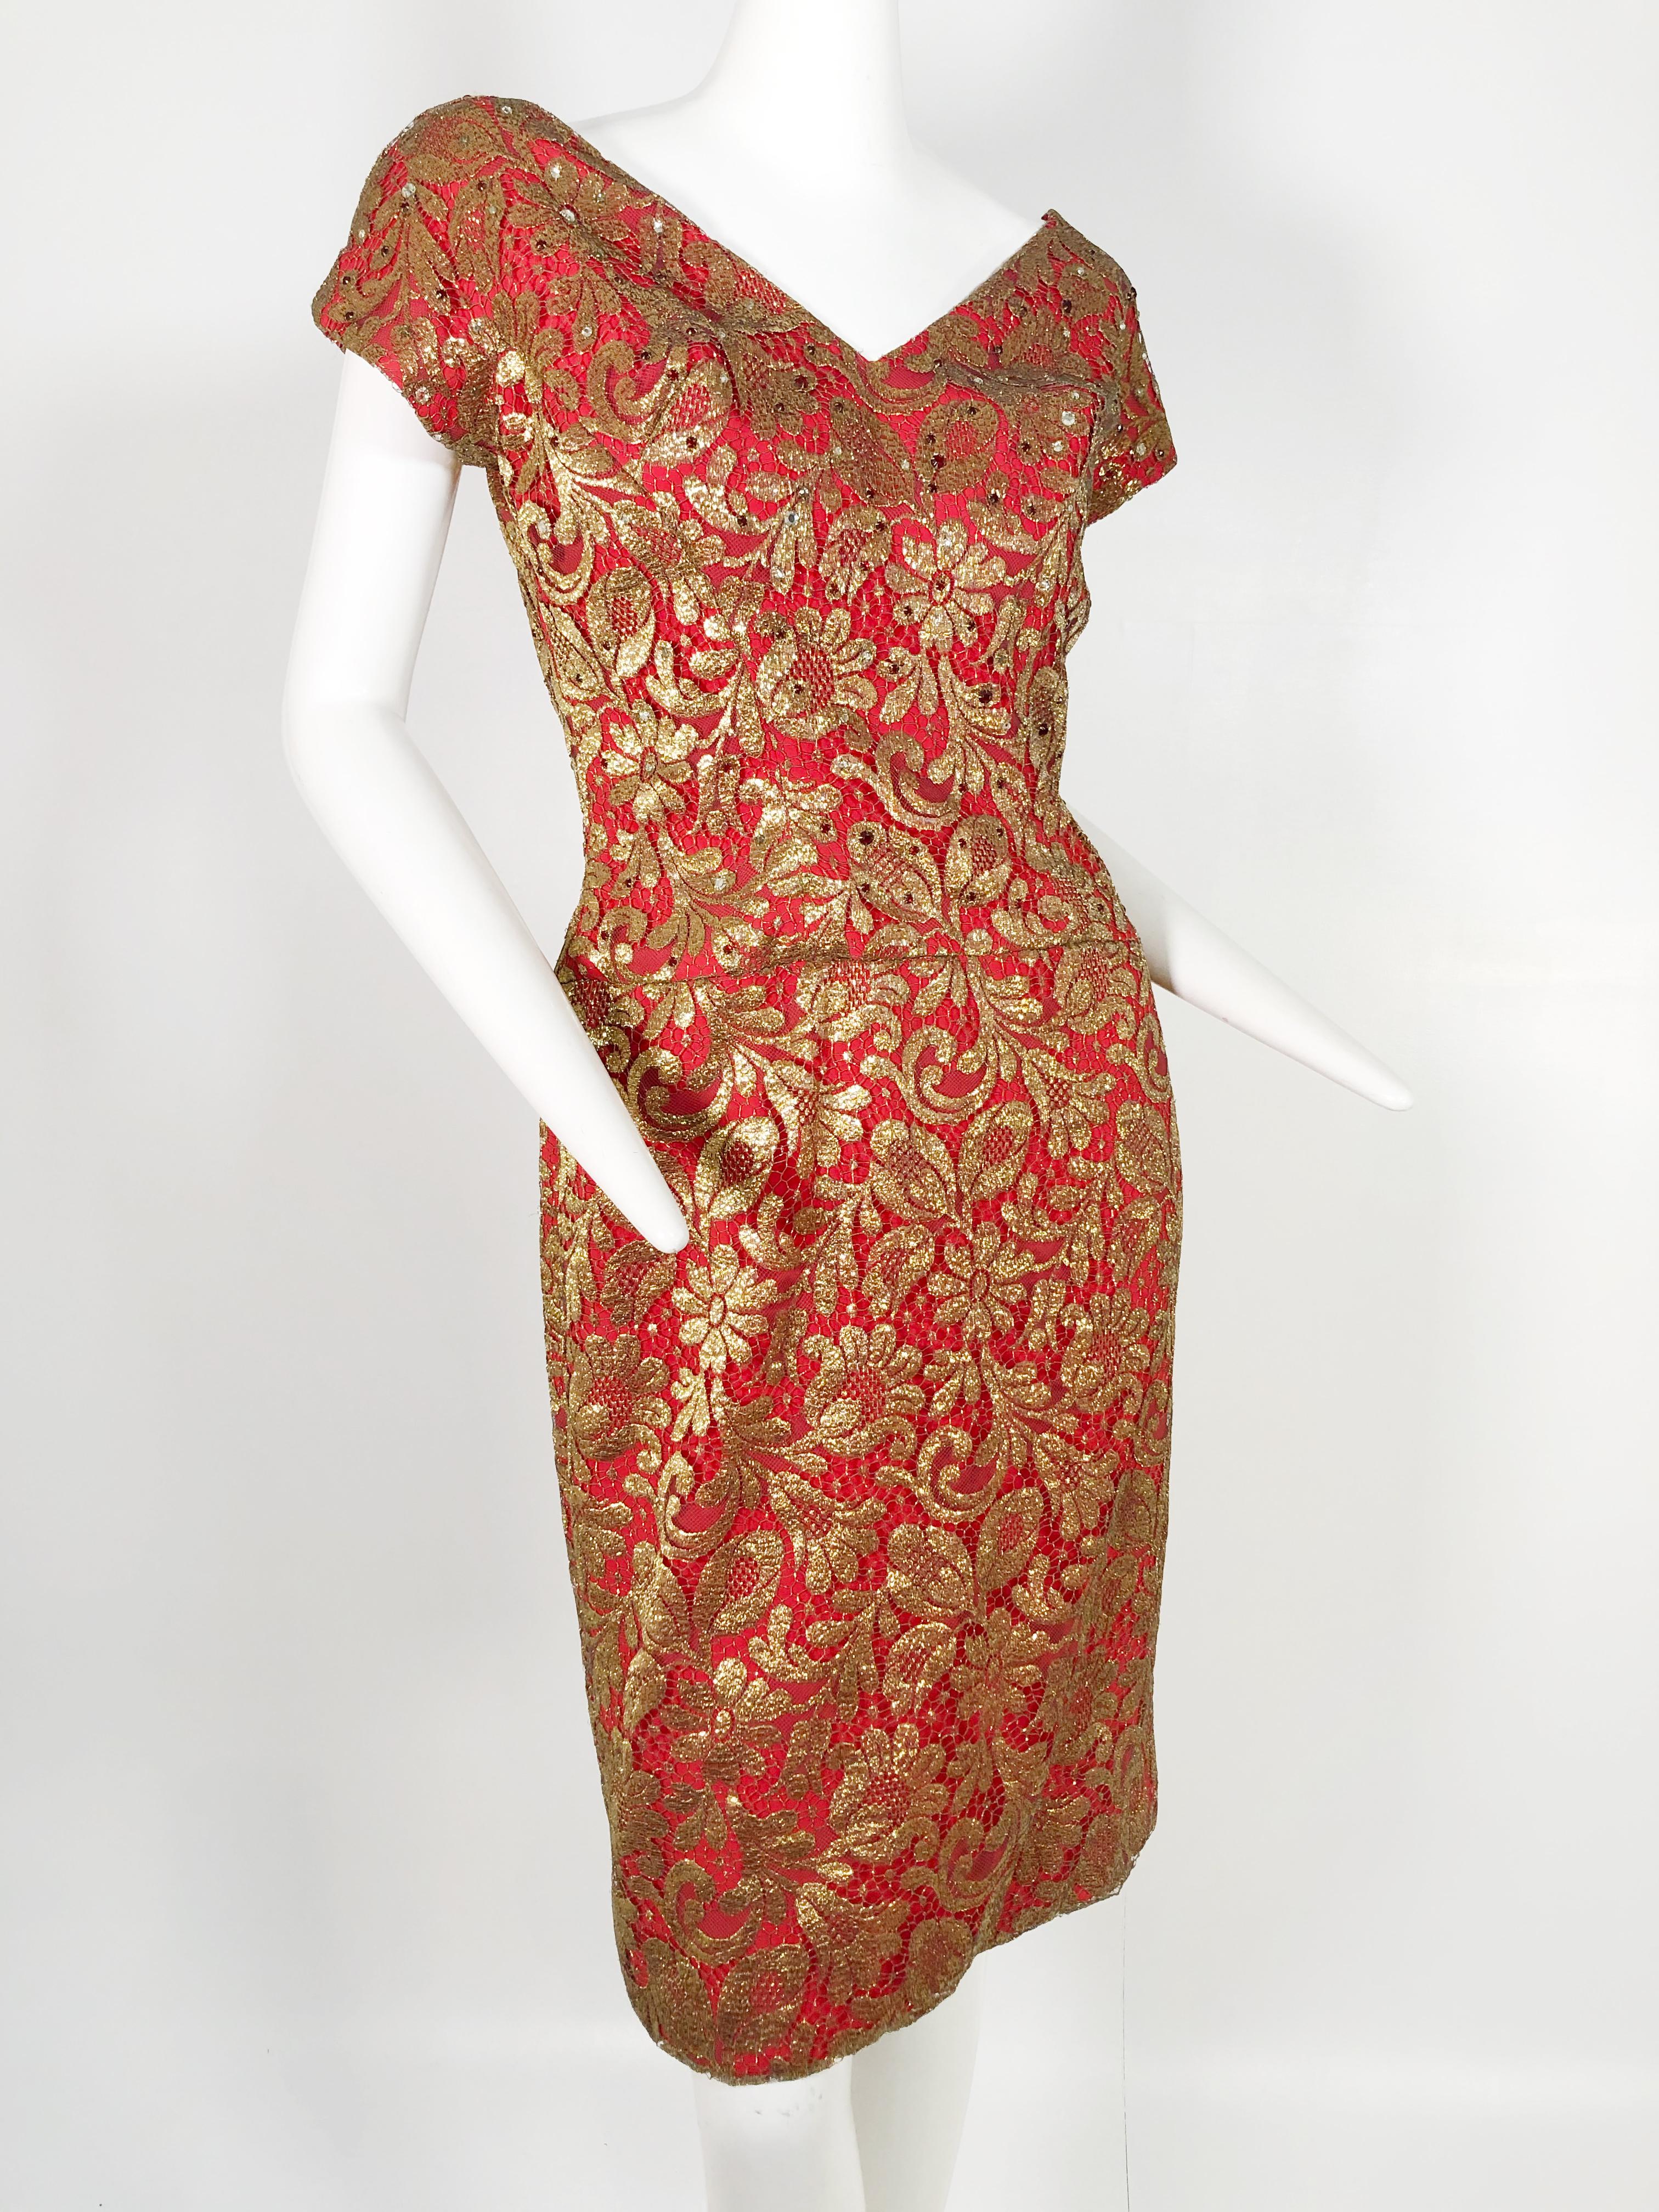 A beautiful 1950s-early 1960s deep red sheath dress with plunging décolletage, gold lame leaf-patterned overlay and scattered garnet-tone stones across the bodice.  Cap sleeves and back zippers. Gathered shoulders with full volume and mini shoulder